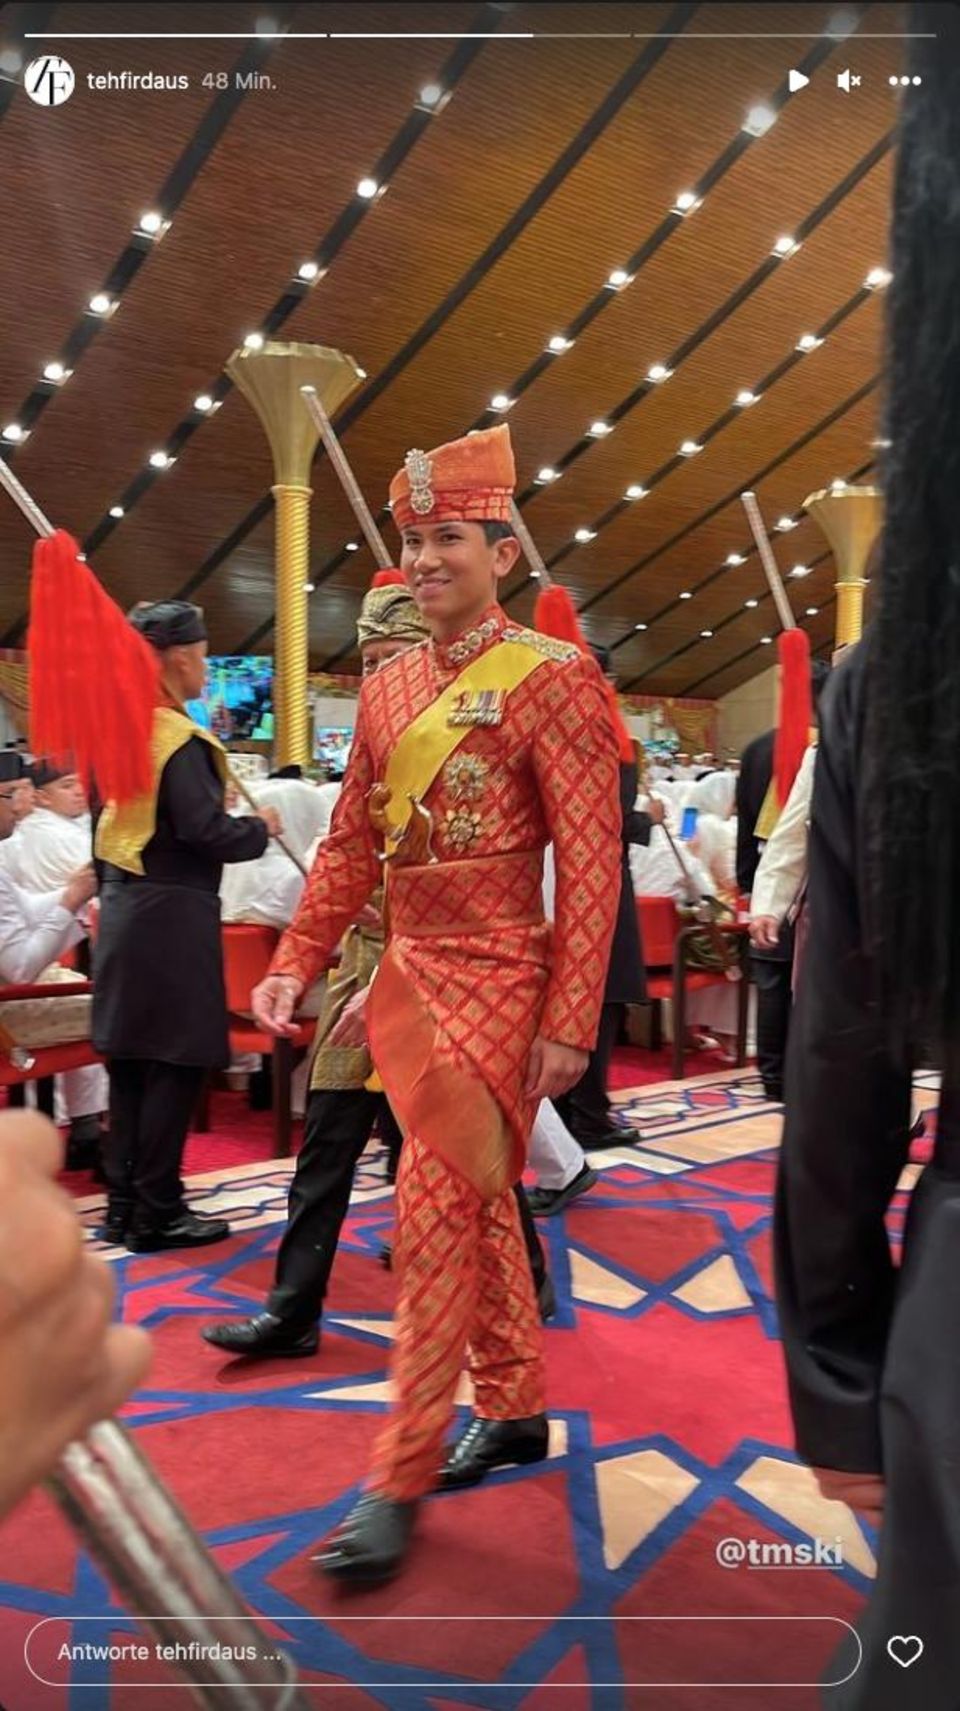 The happy groom is beaming from ear to ear and can be seen in the traditional red wedding robe. 